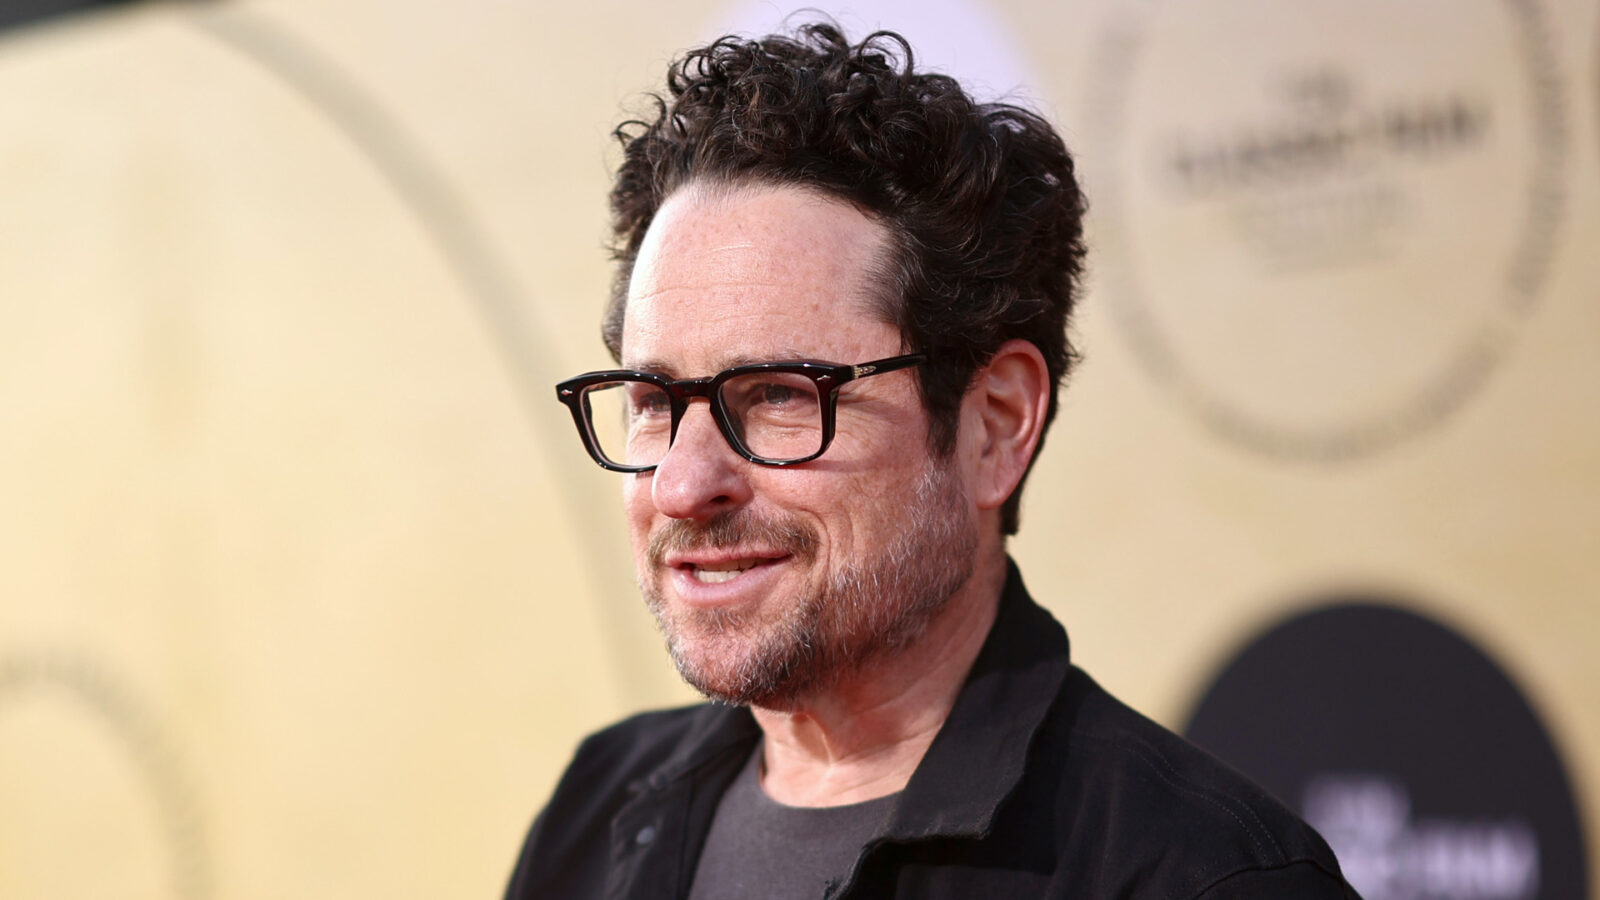 Production details revealed for J.J. Abrams’ HBO Max series ‘Demimonde’